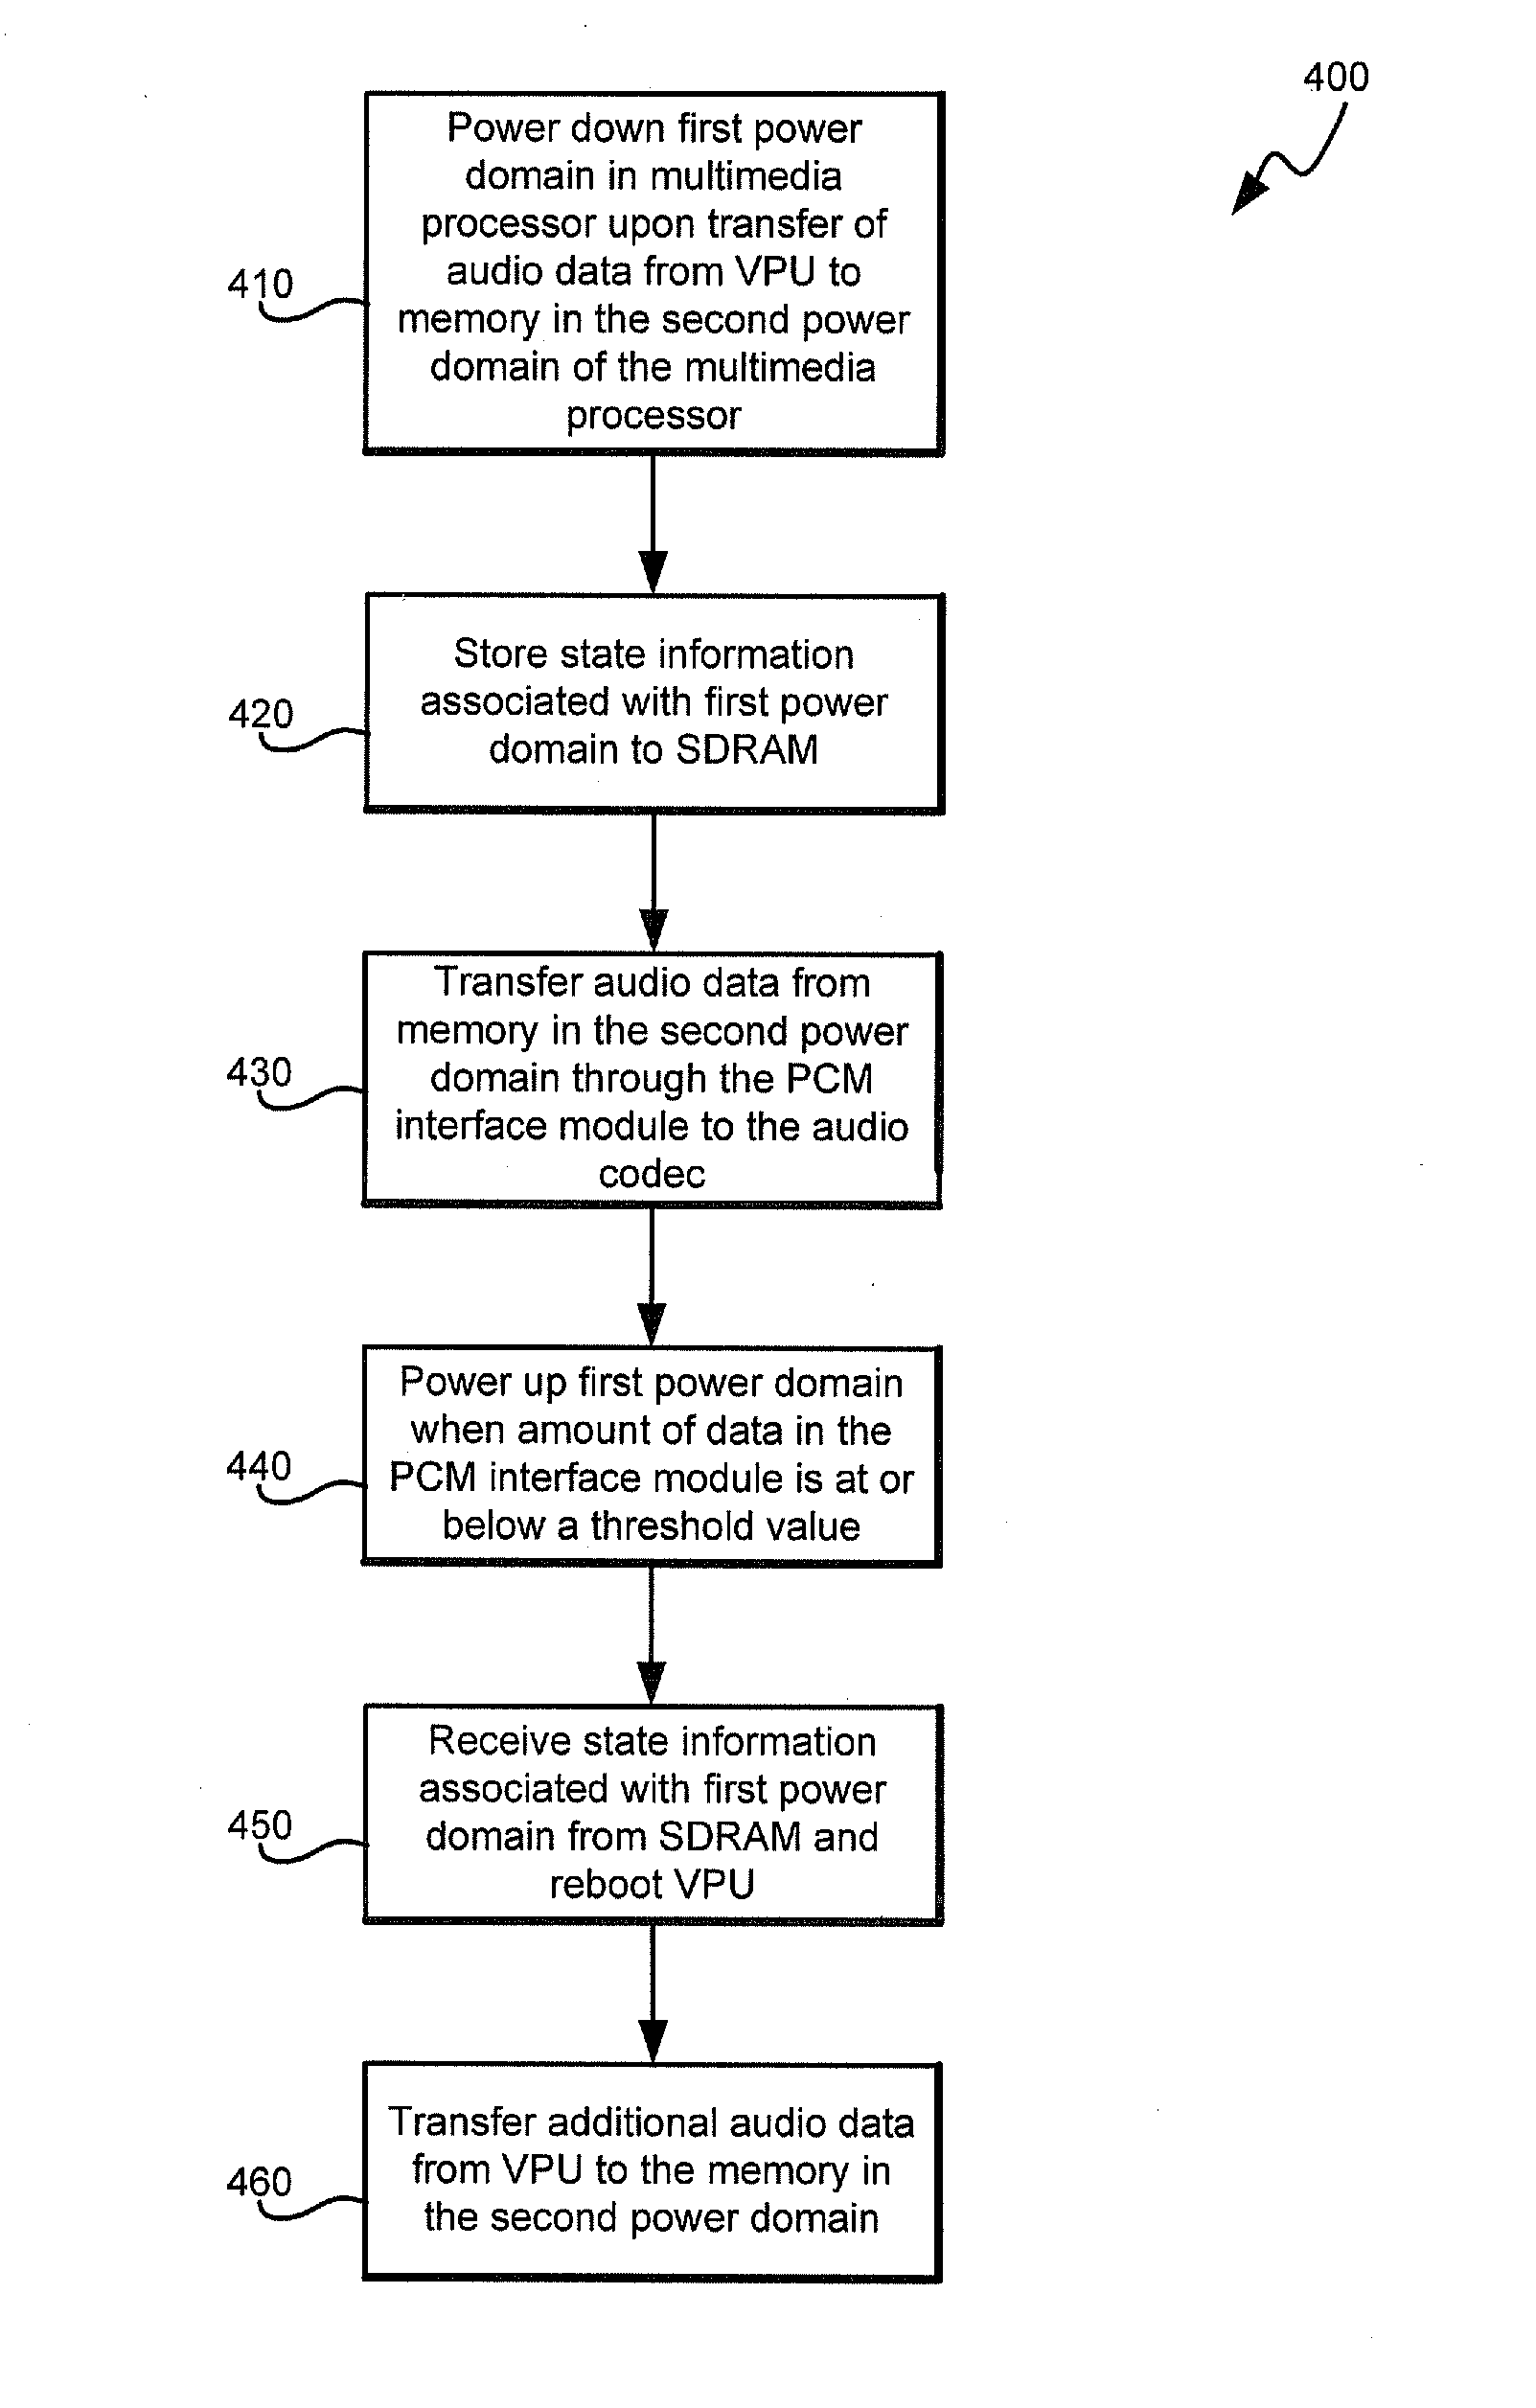 Method and System For Suspending Video Processor and Saving Processor State in SDRAM Utilizing a Core Processor